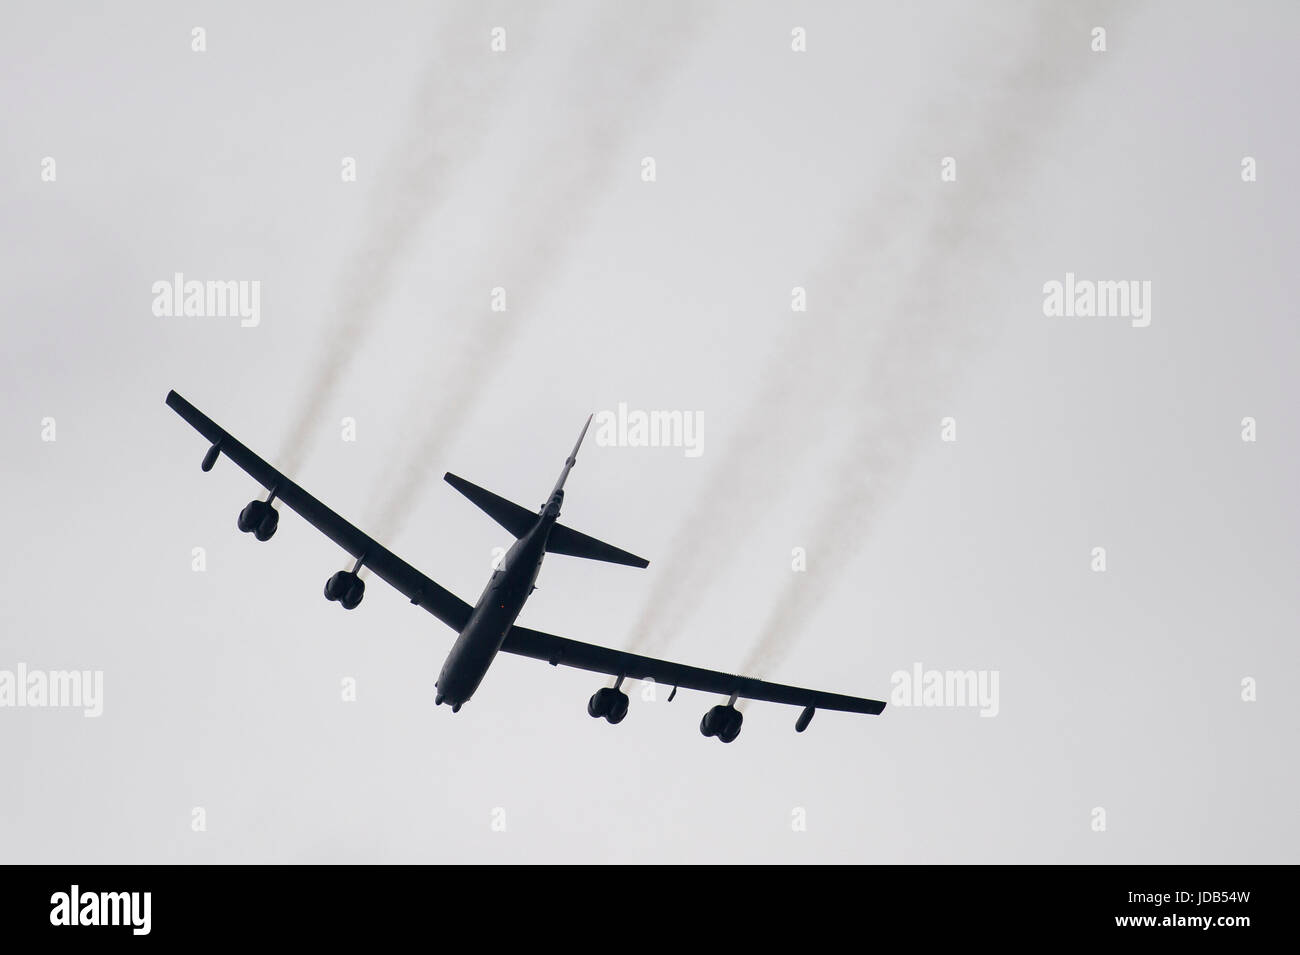 An American long-range strategic bomber Boeing B-52 Stratofortress during the 45th edition of Exercise BALTIC OPERATIONS  BALTOPS 2017 in Ustka, Polan Stock Photo